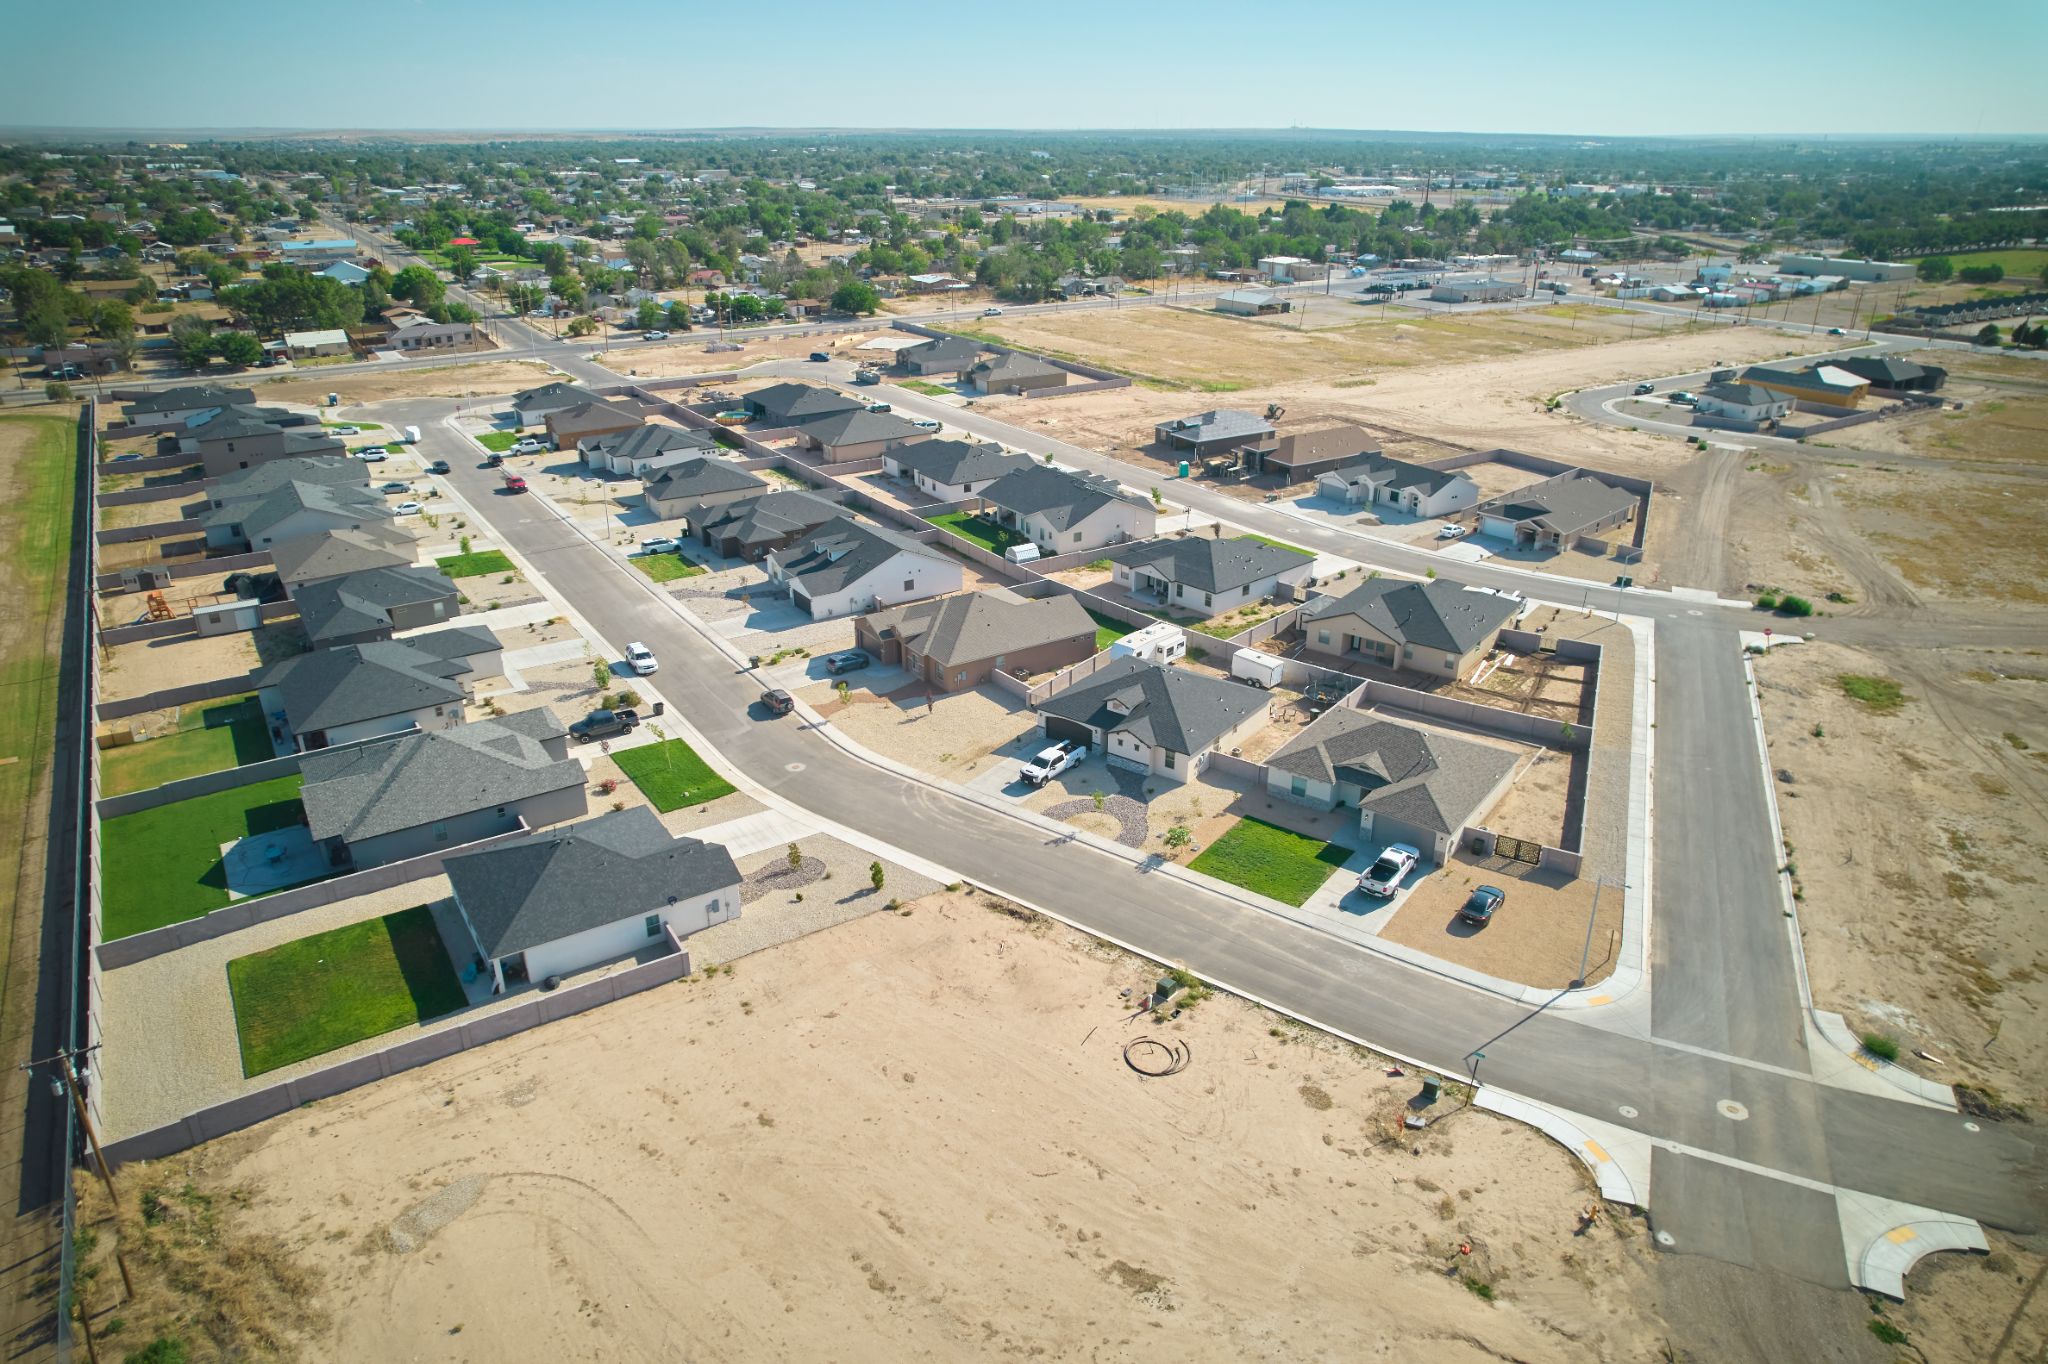 Click the Carlsbad, New Mexico’s Real Estate Market Provides Competitive and Modern Options for Residents Slide Photo to Open